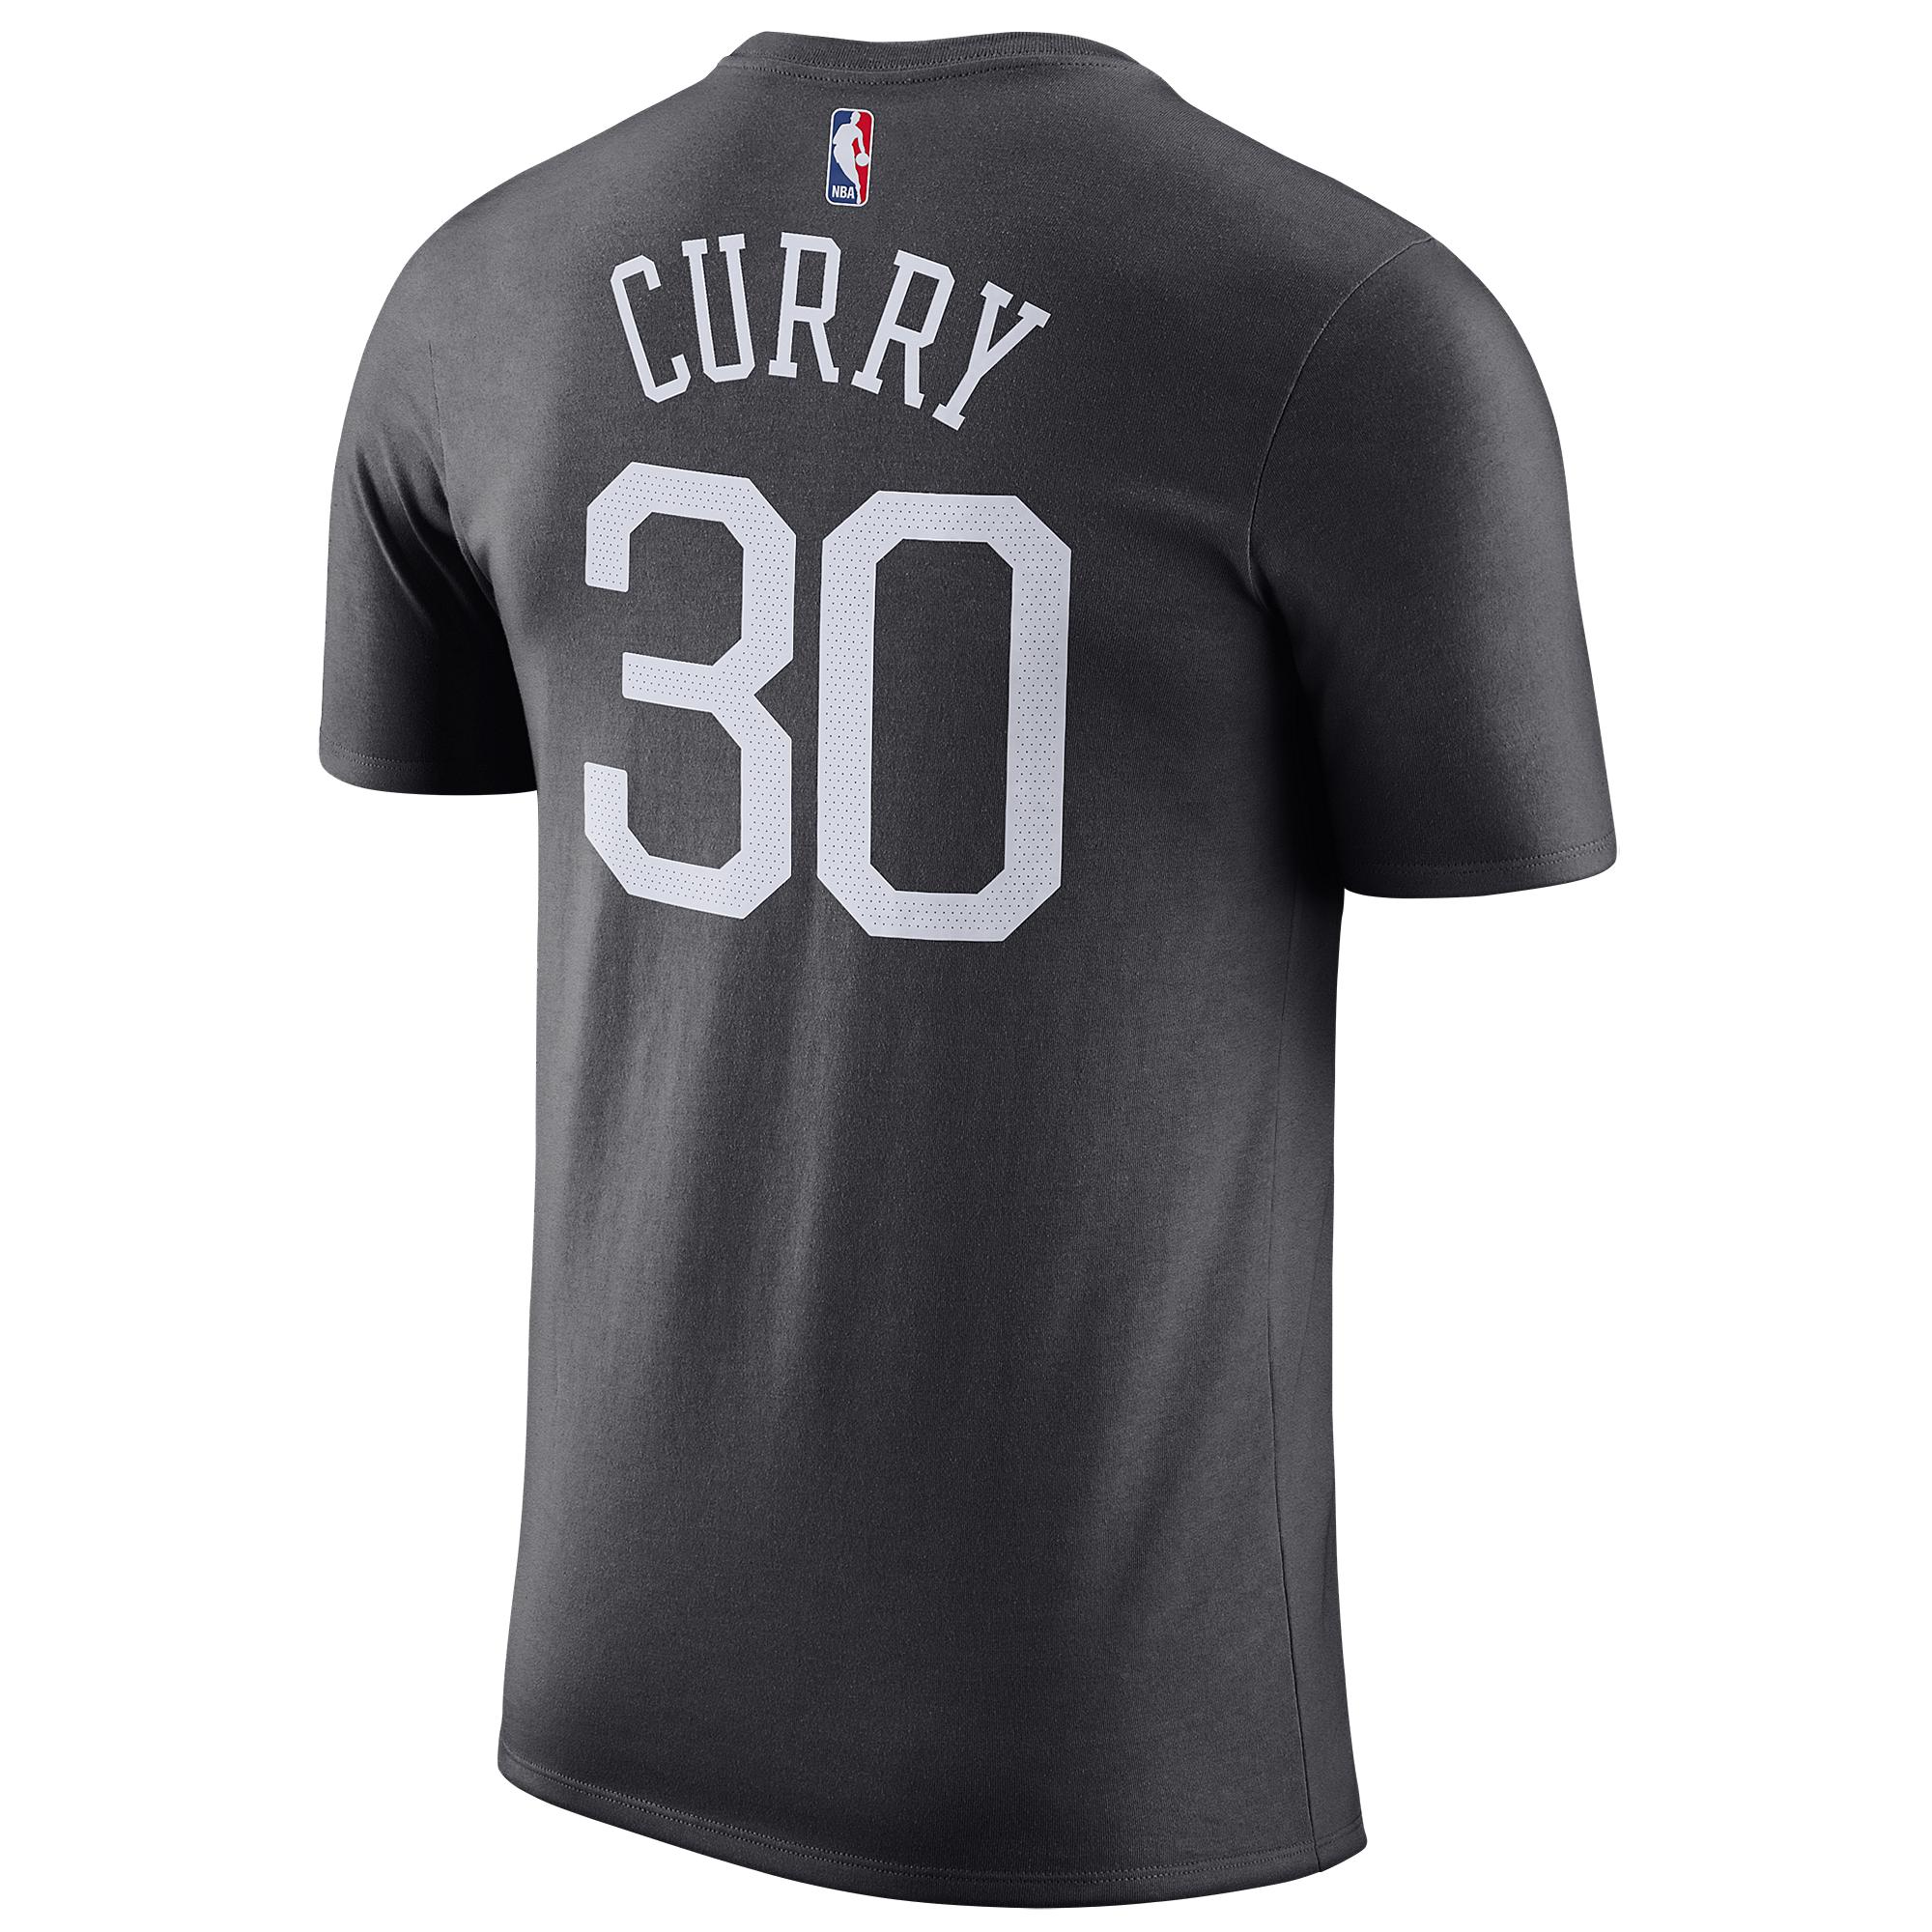 Nike Stephen Curry Nba Player Name & Number T-shirt in Black for Men - Lyst